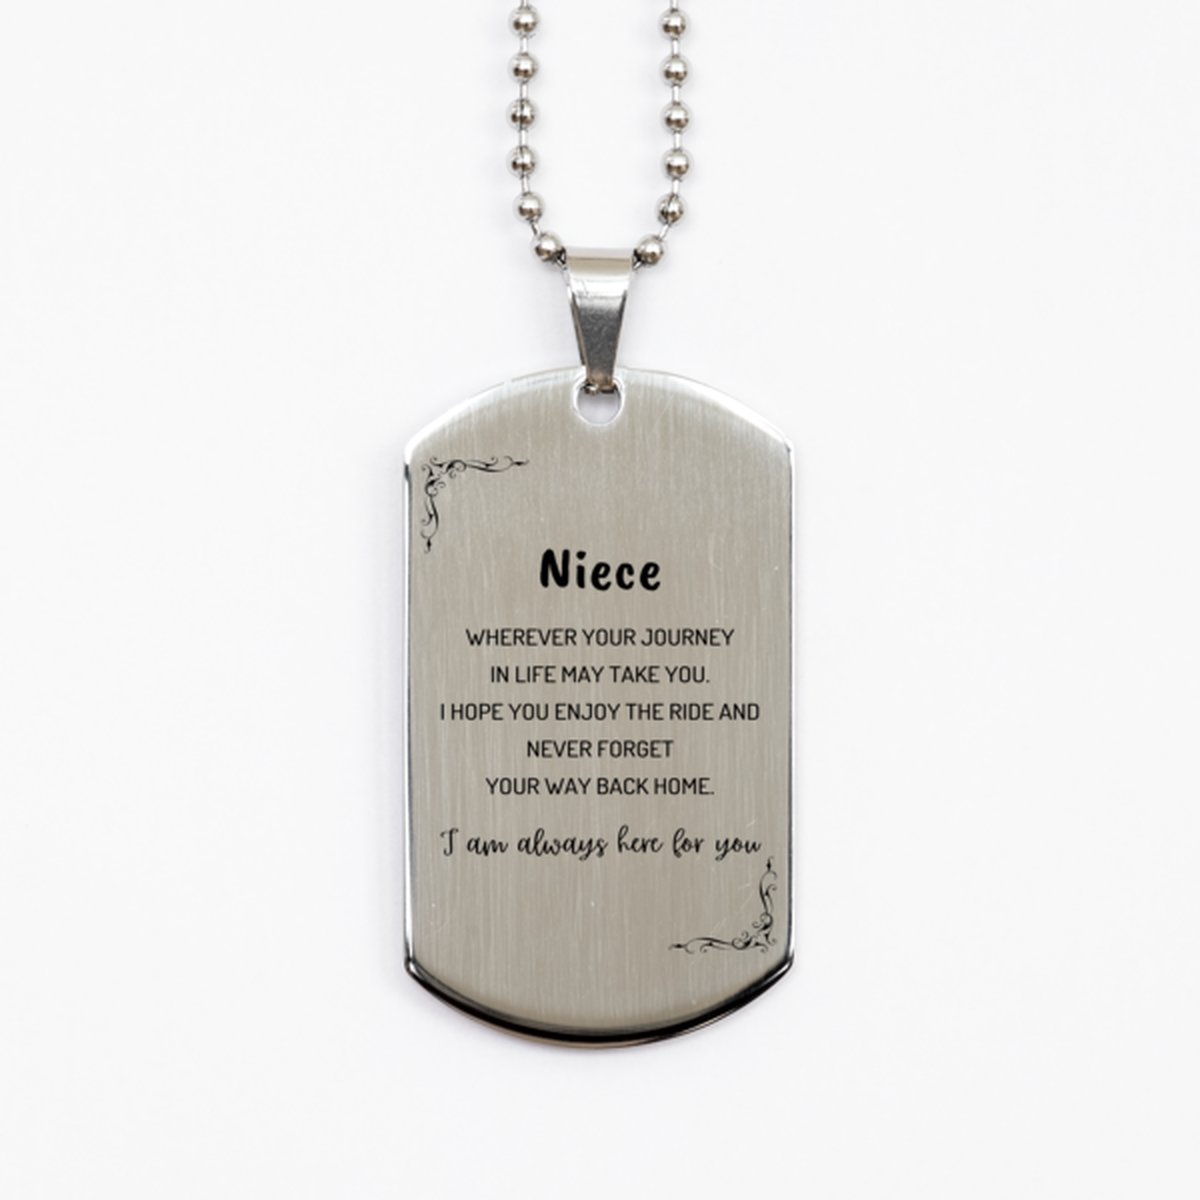 Niece wherever your journey in life may take you, I am always here for you Niece Silver Dog Tag, Awesome Christmas Gifts For Niece, Niece Birthday Gifts for Men Women Family Loved One